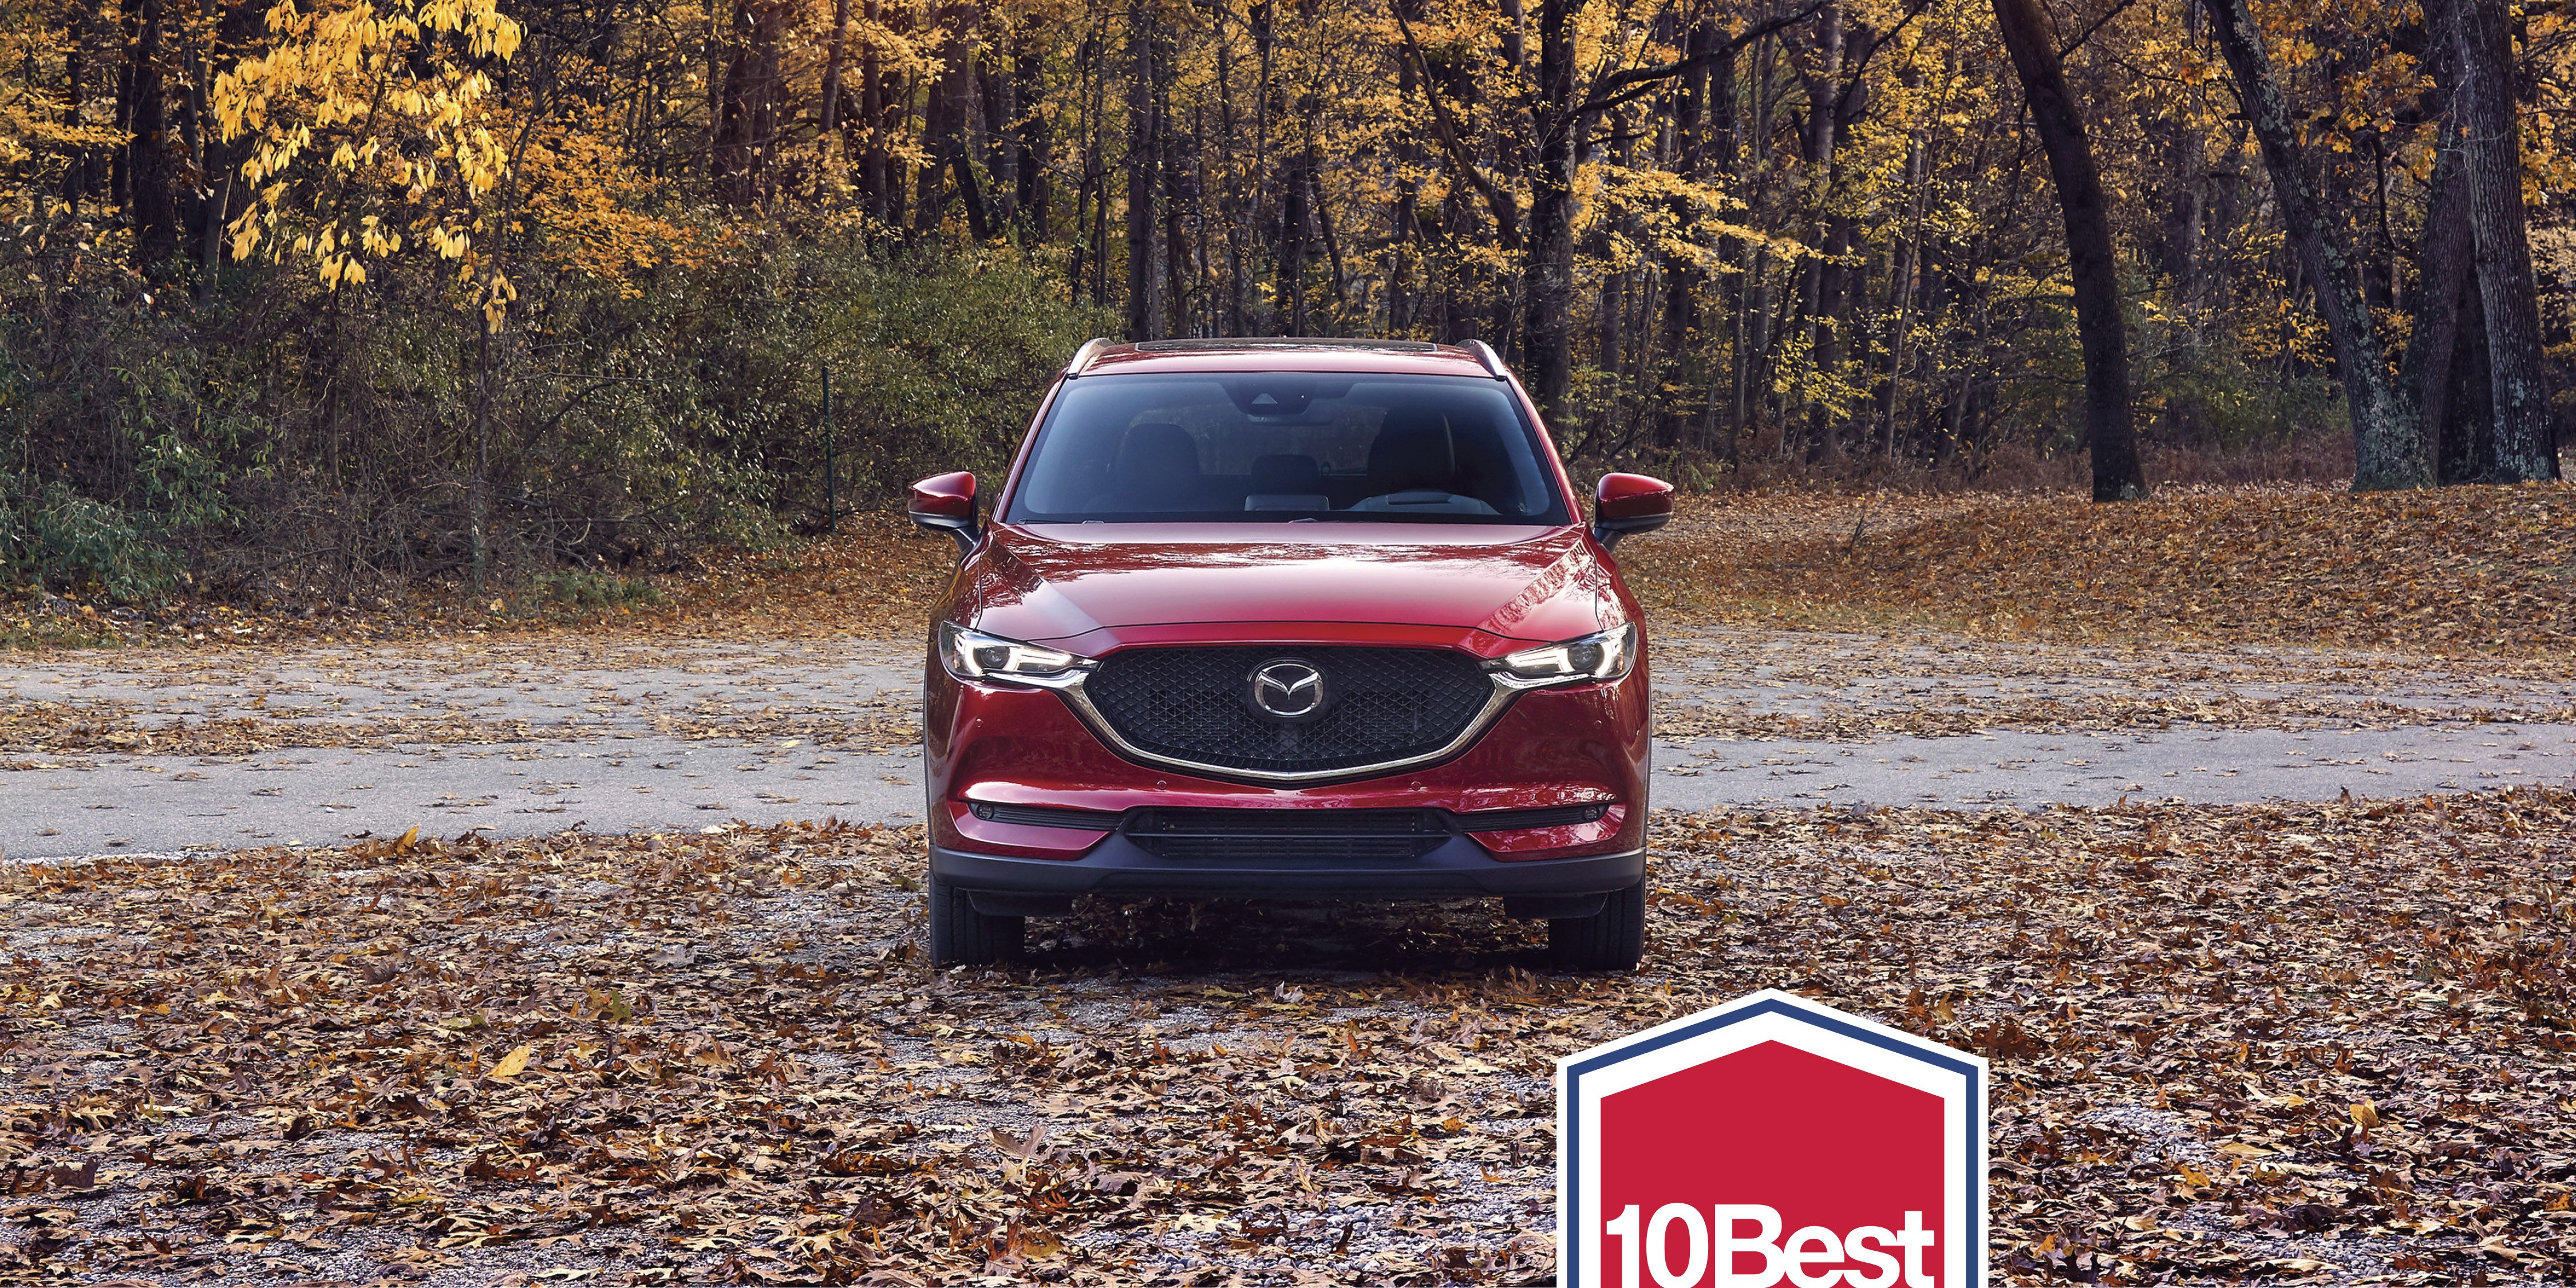 2020 Mazda Cx 5 Car And Driver S 10best